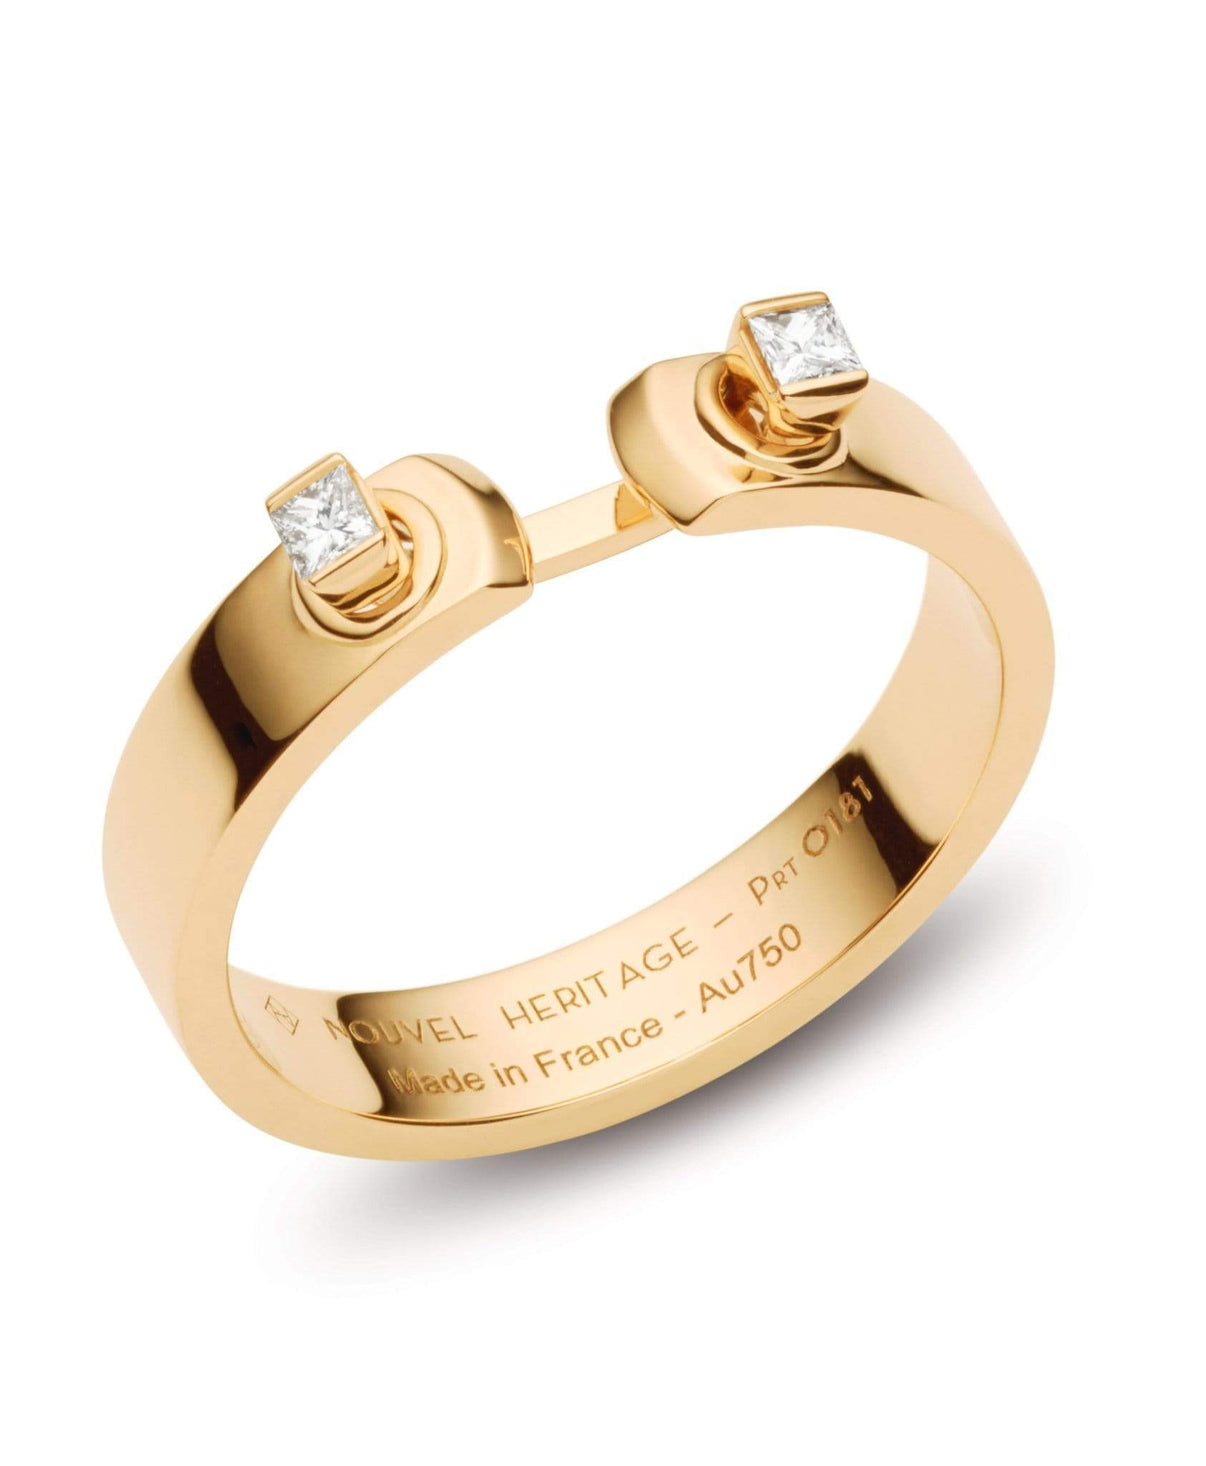 Dinner Date Mood Ring: Discover Luxury Fine Jewelry | Nouvel Heritage